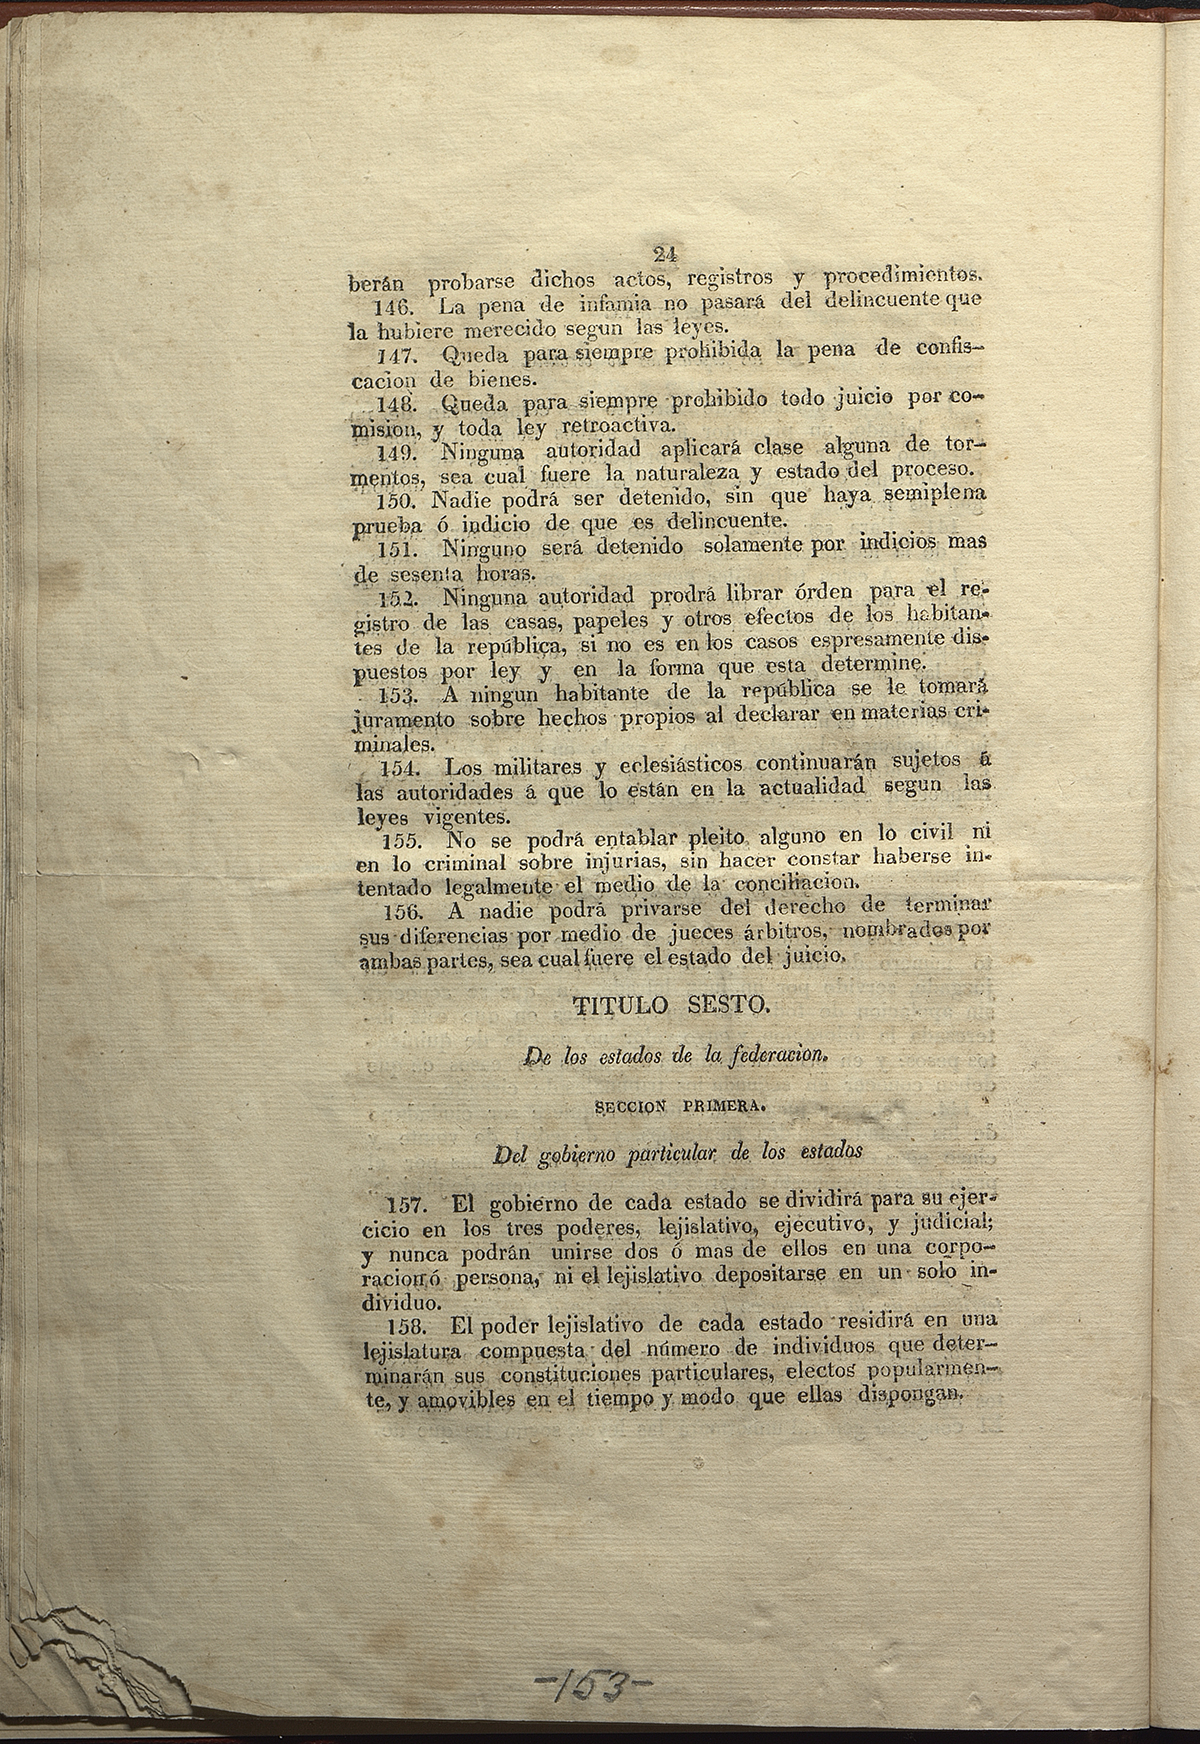 Title V, Section VII, Article 145-156; Title VI, Section I, Articles 157-158